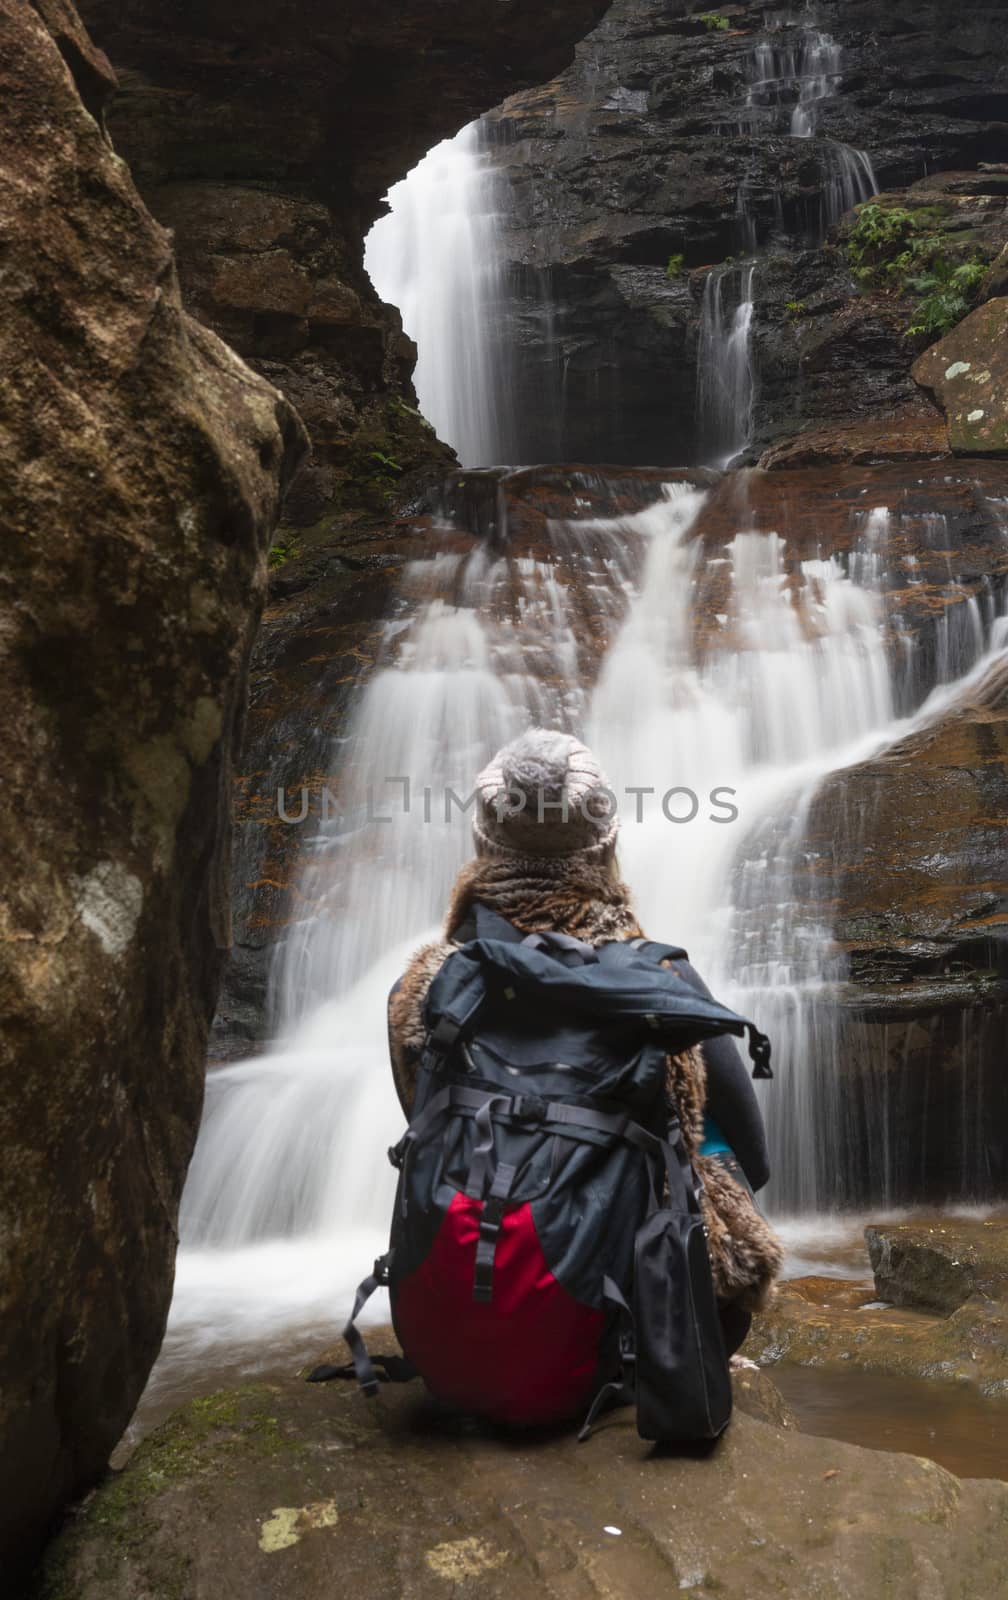 A female bushwalker sitting in awe of the falls watching them flowing freely after rain